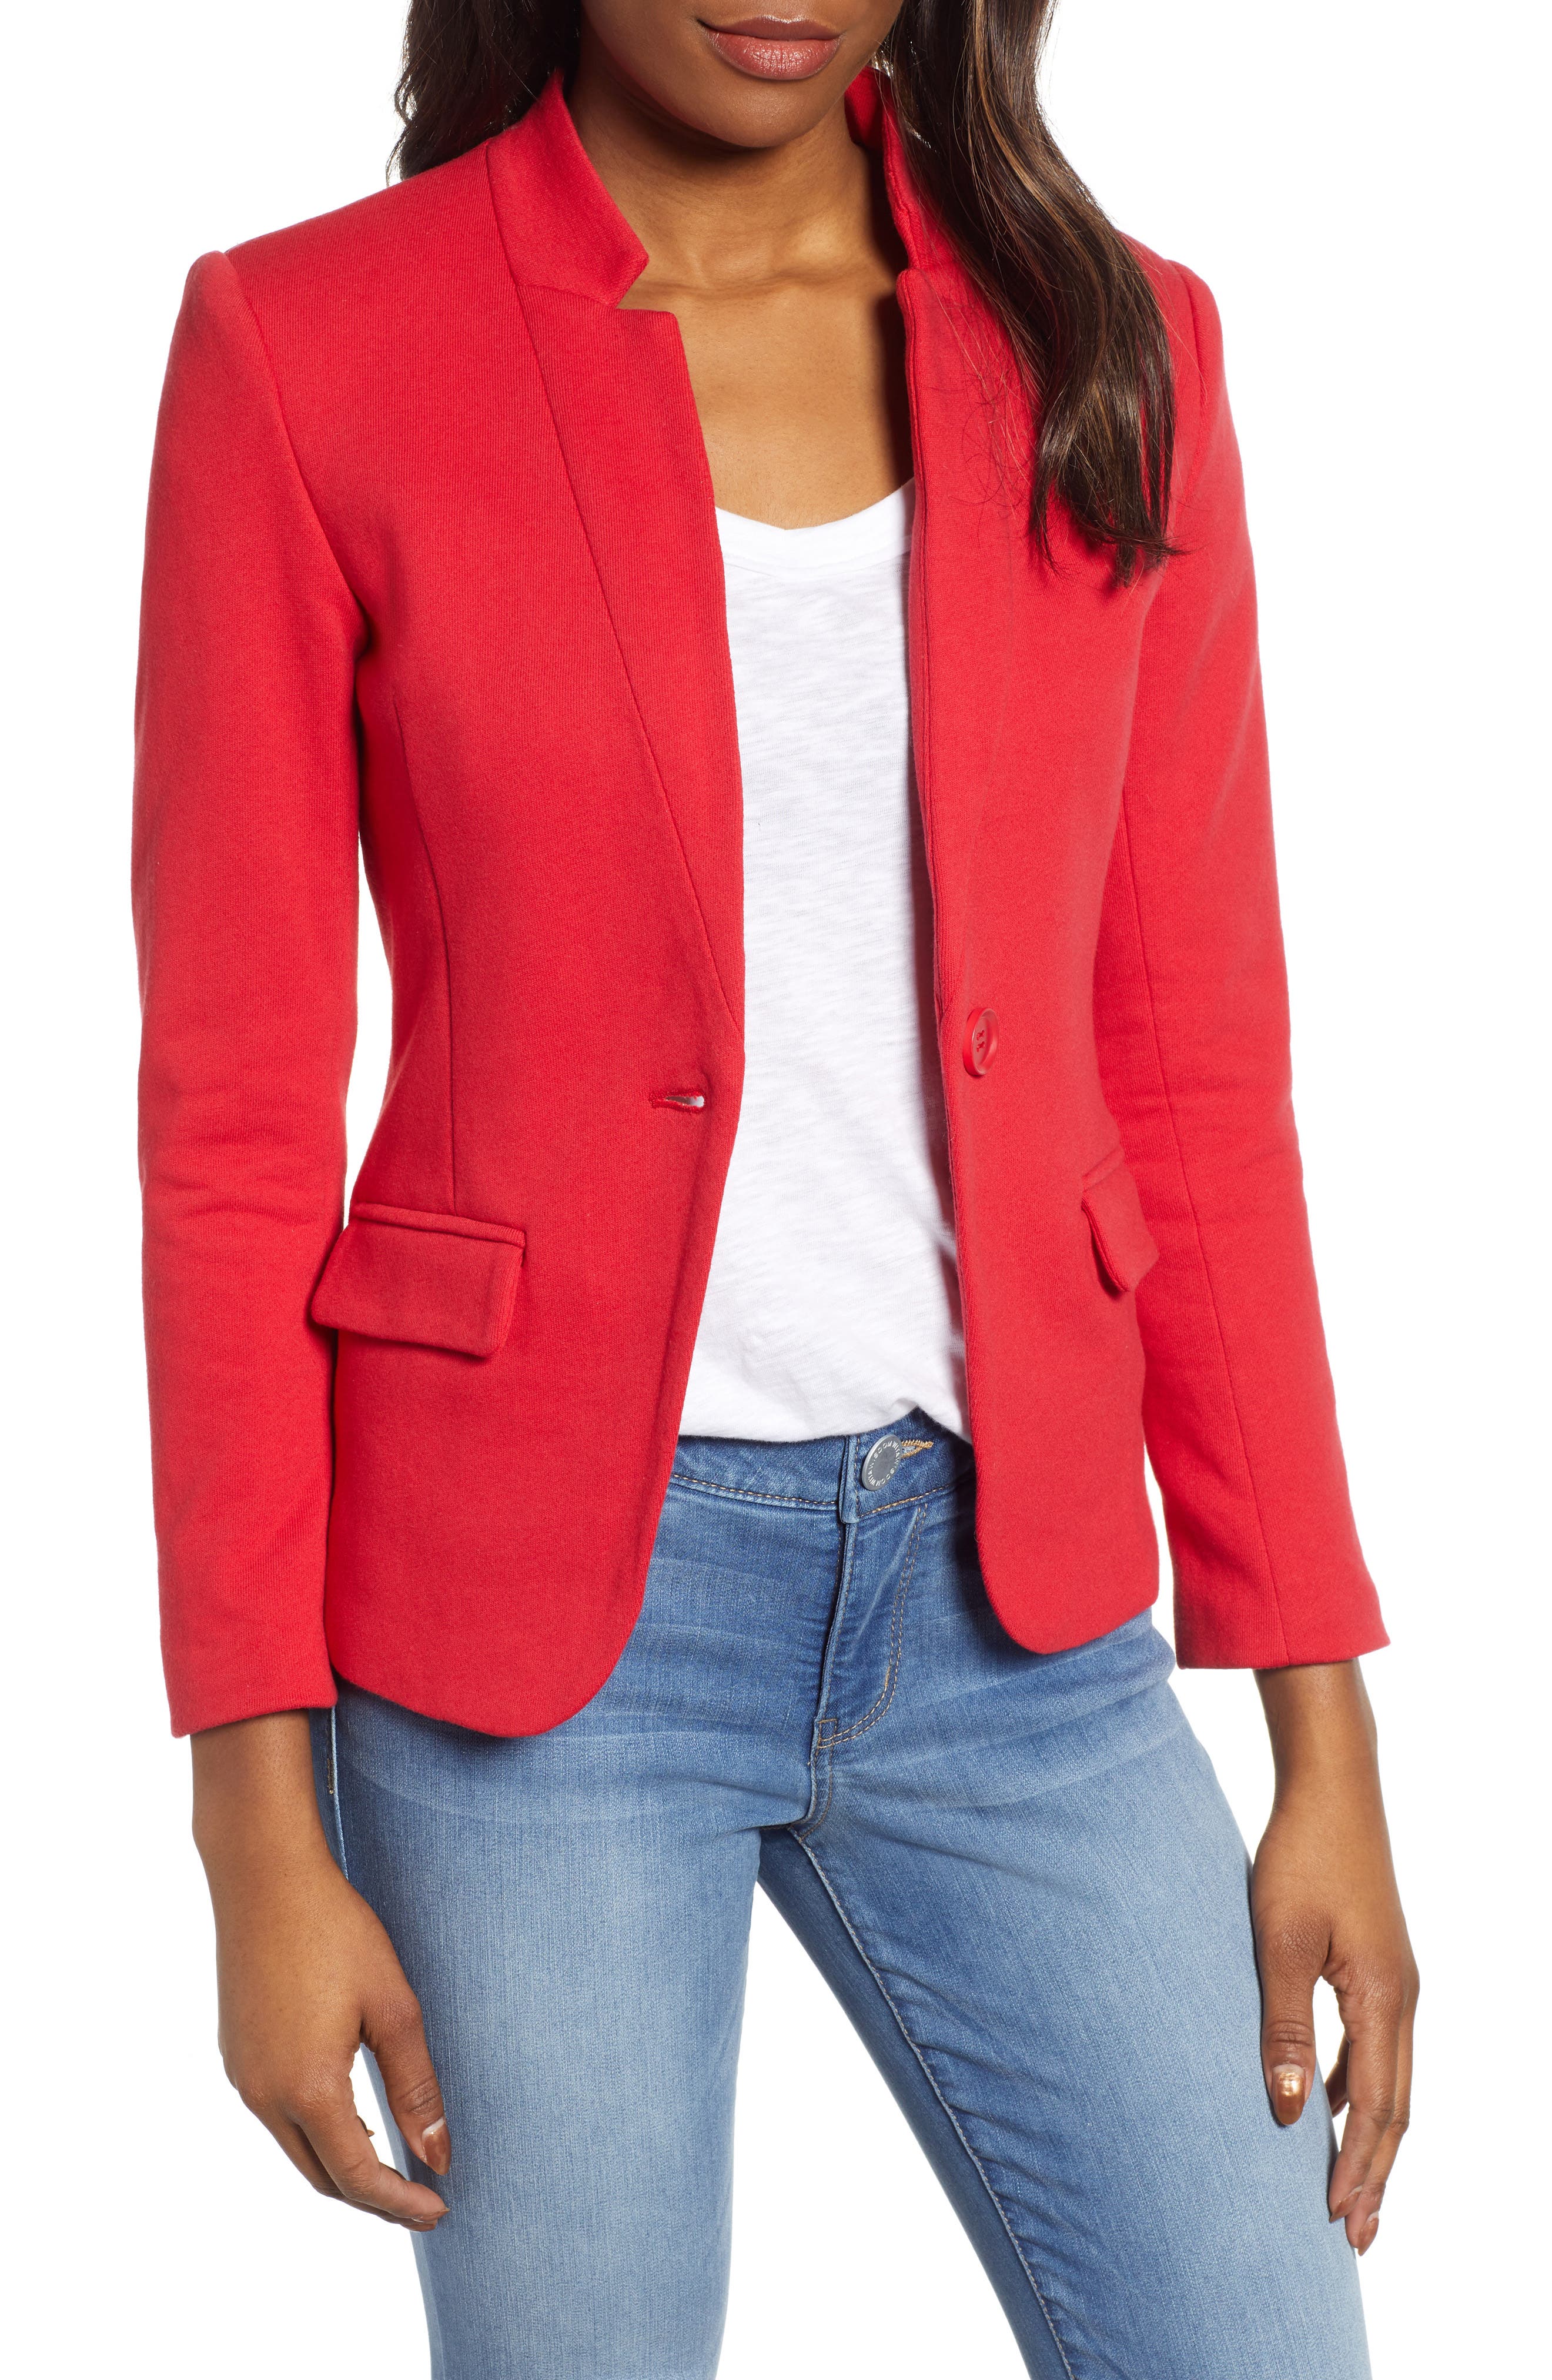 red blazer and jeans